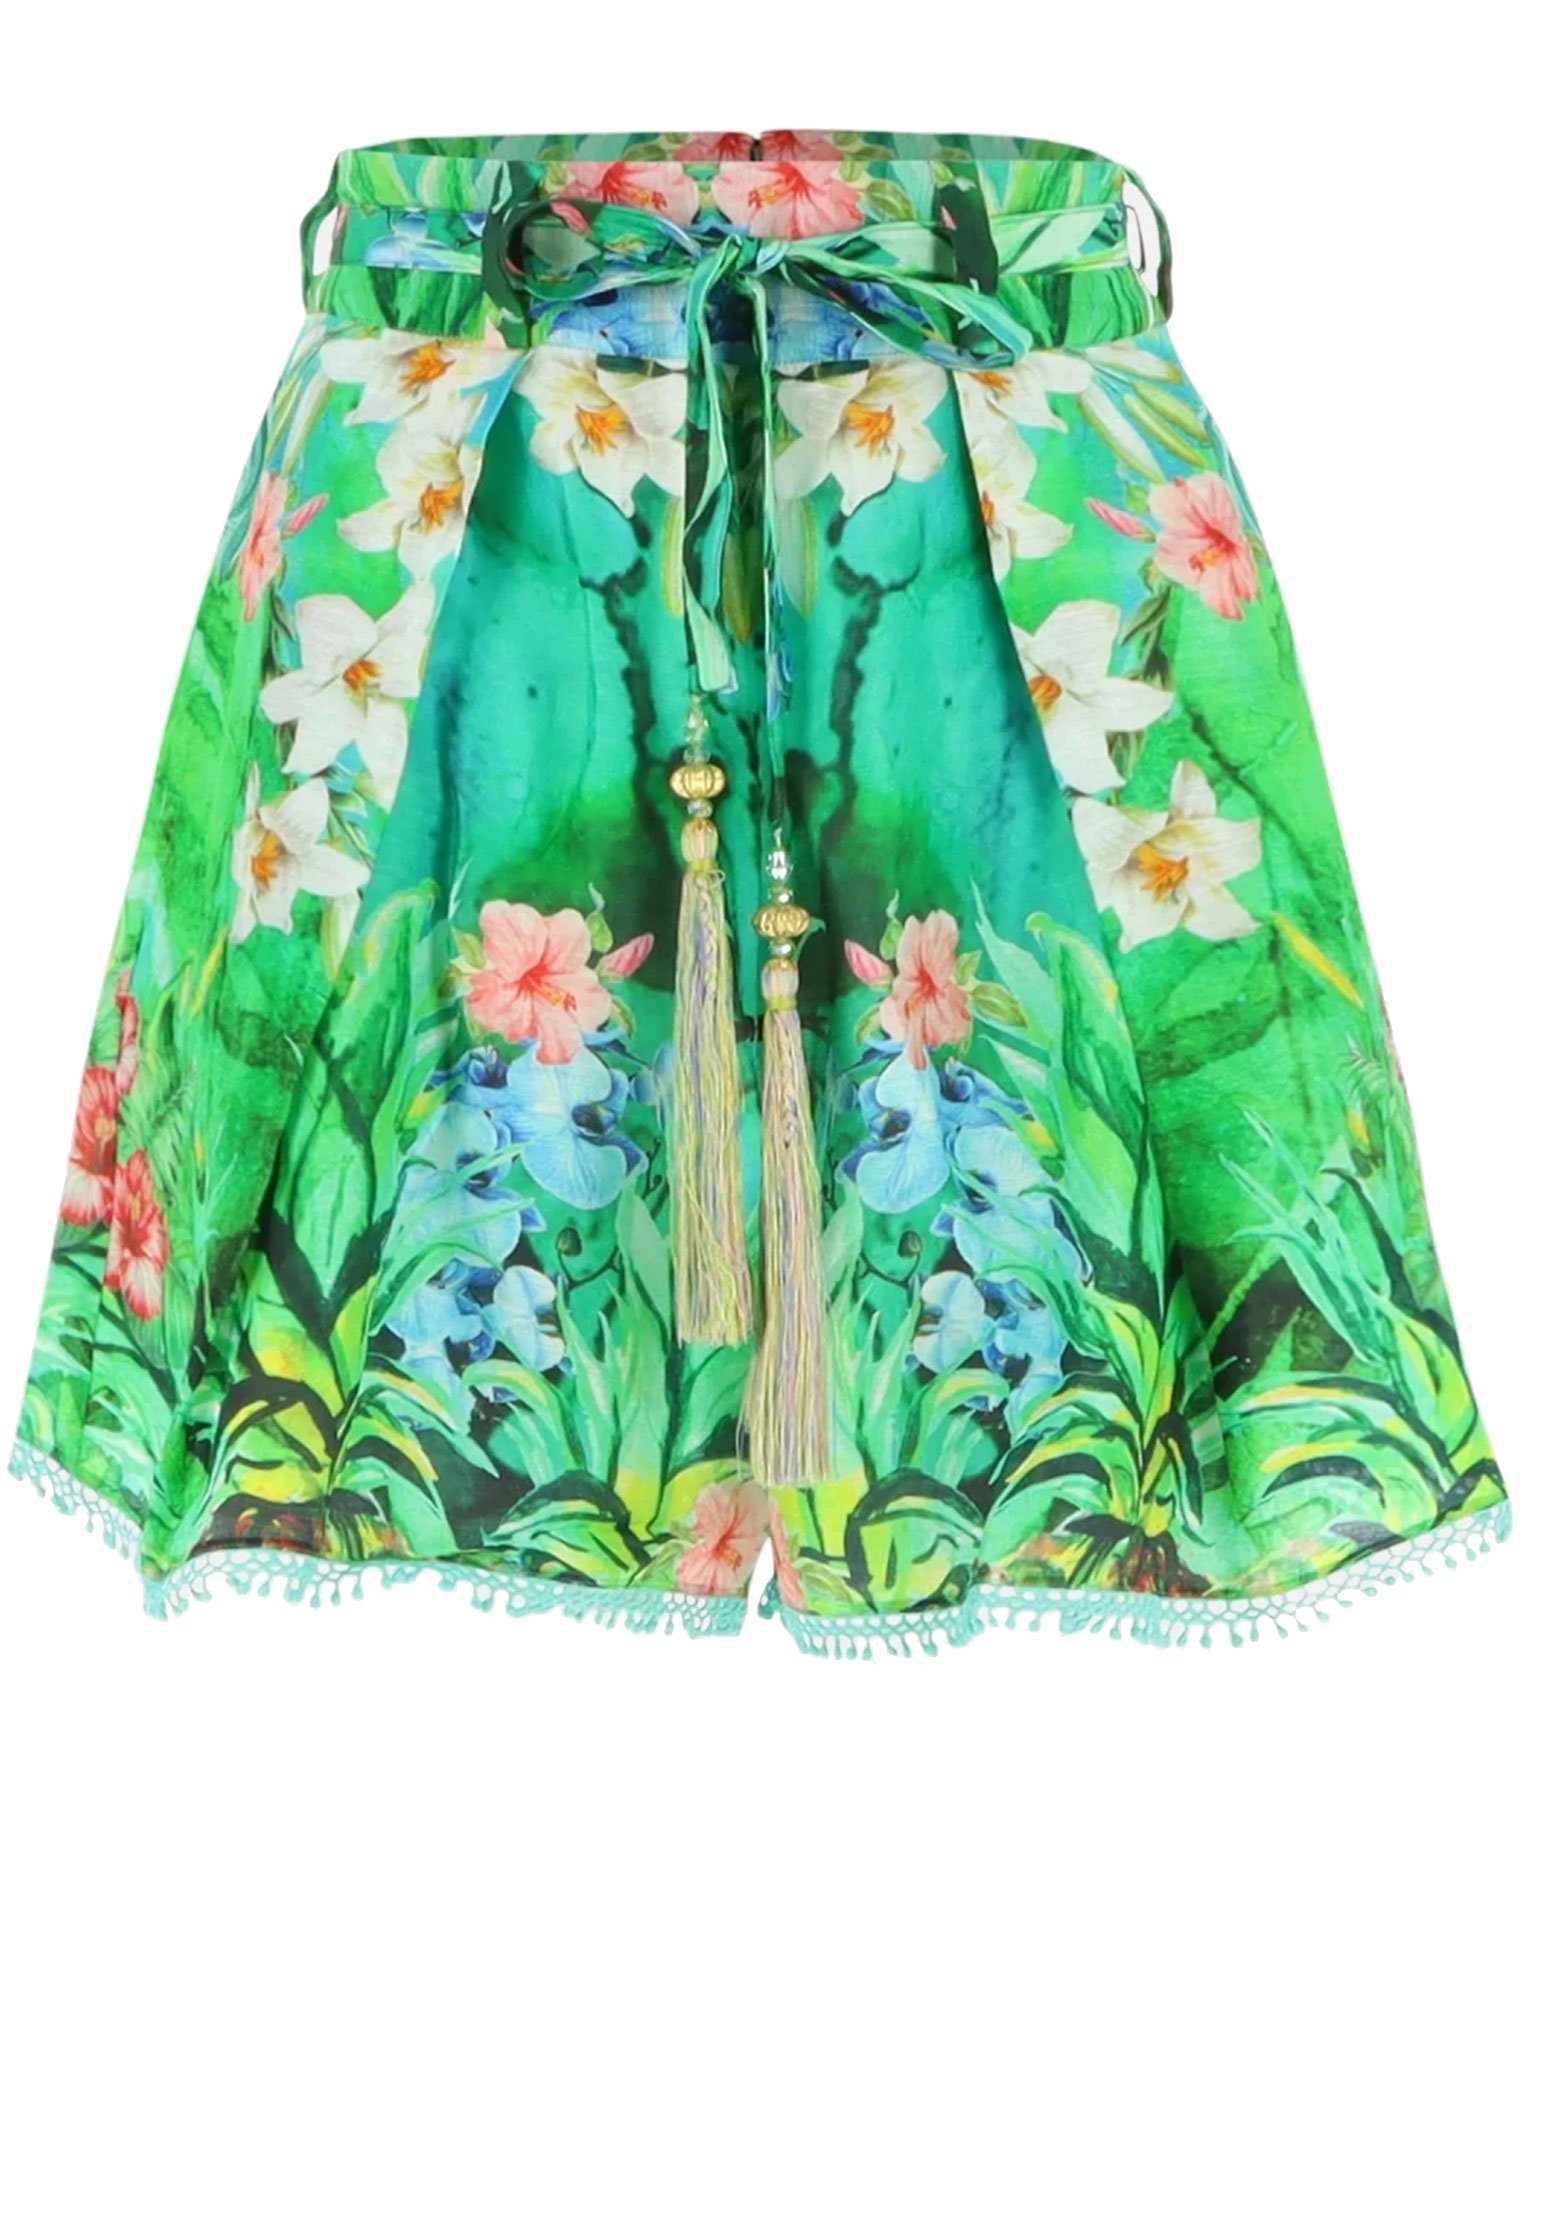 Shorts KORE' COLLECTIONS Color: green (Code: 2308) in online store Allure